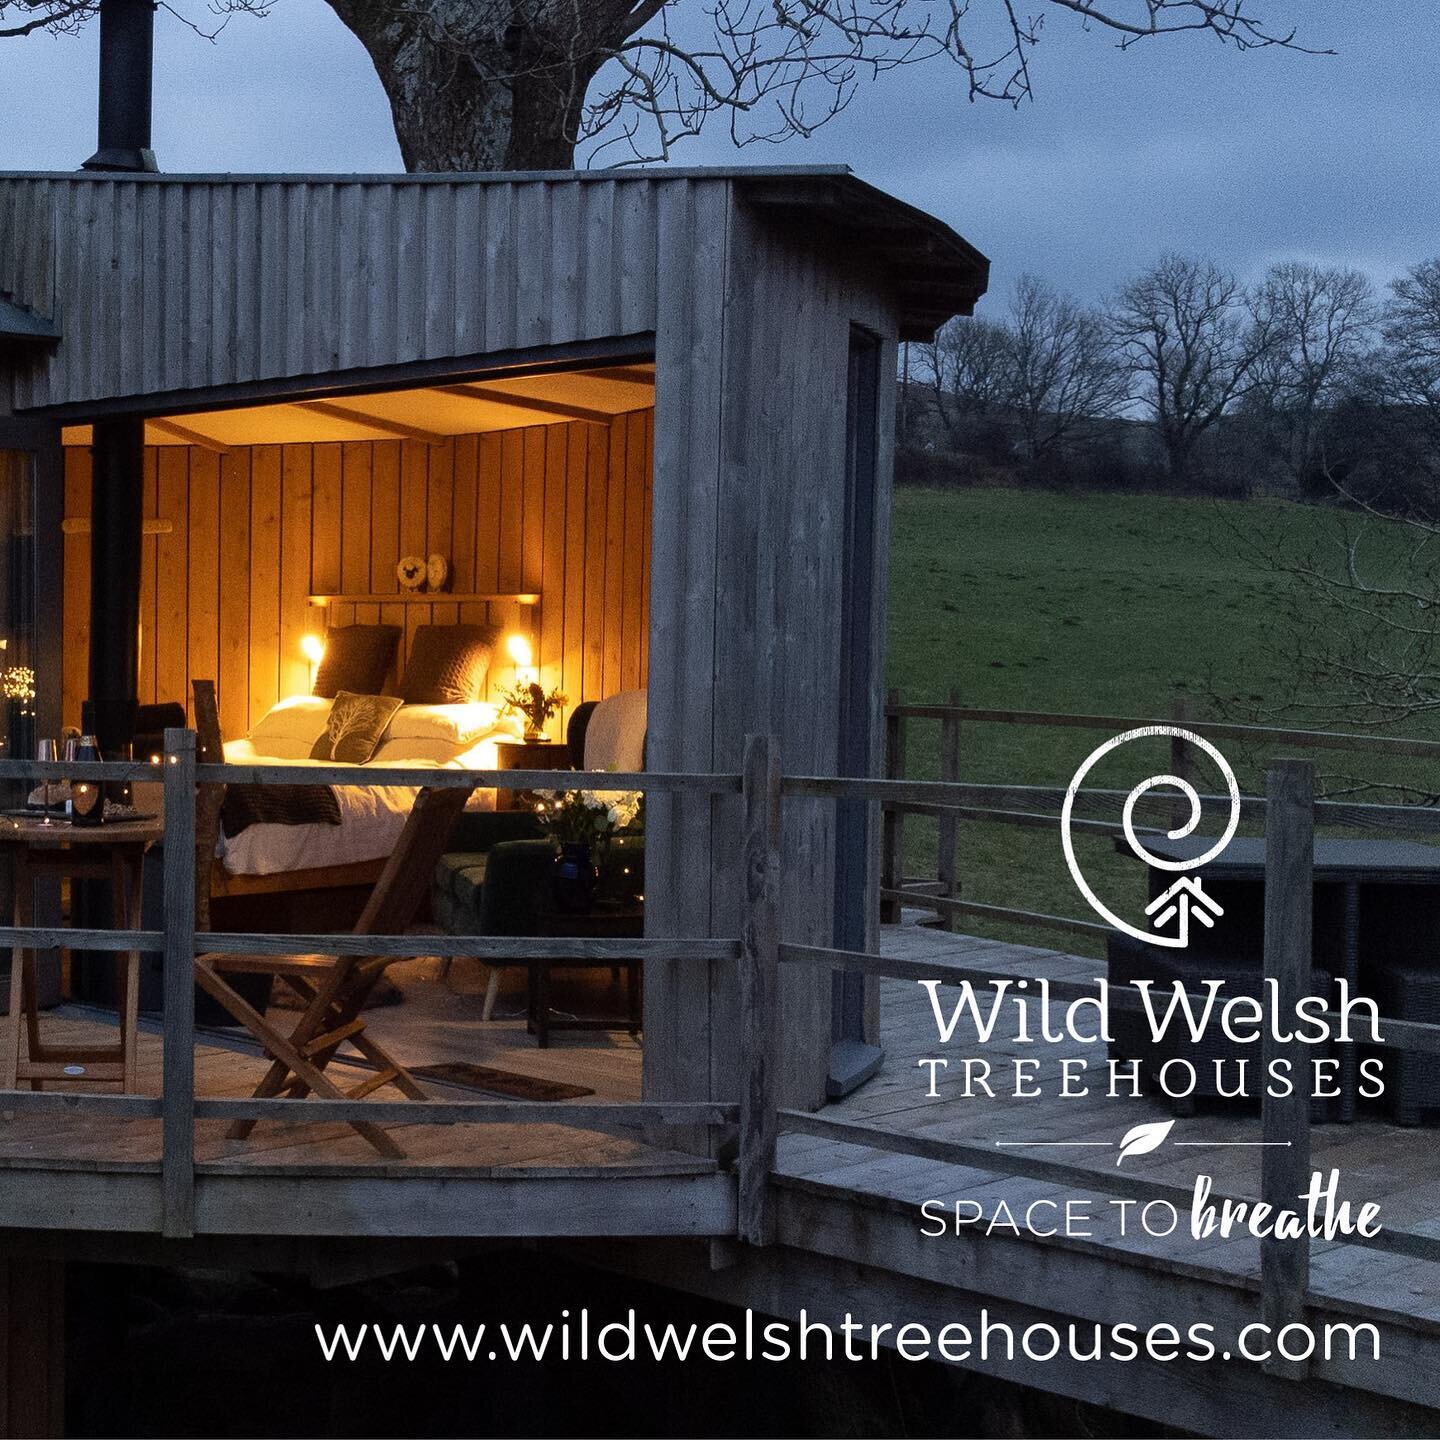 Happy Bank Holiday! A fabulous evening waiting for the stars in the hot tub ✨
.
.
.
.
#treehousewales #treehouseholiday #wales #hottub #stars #bubbles #bankholiday #romantic #honeymoon #engagement #marriageproposal #holididay #surroundedbynature #cam